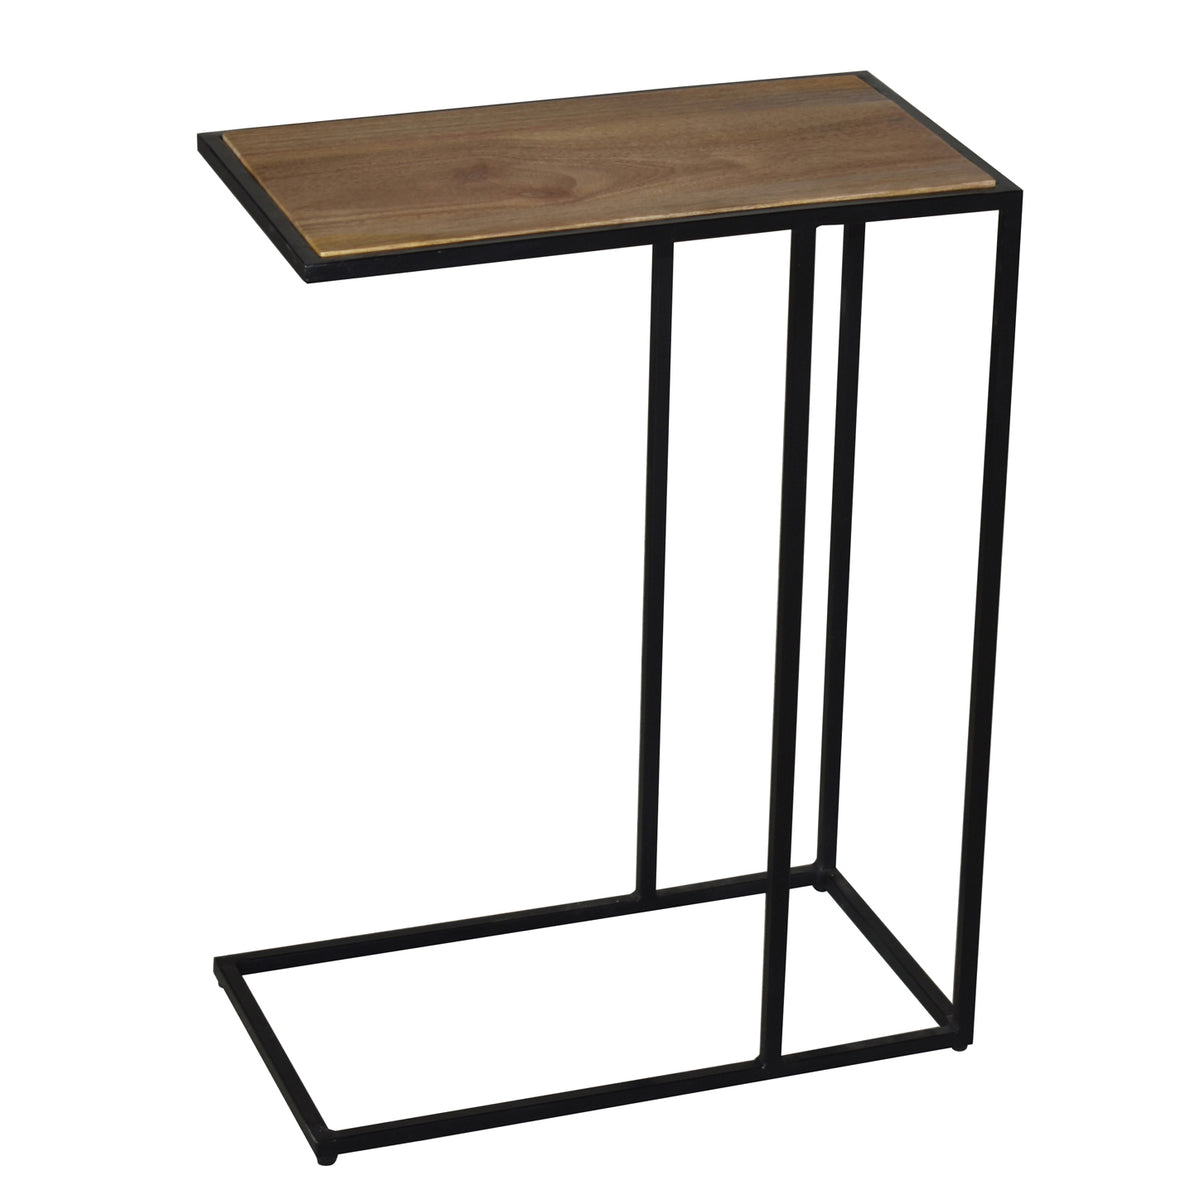 Bare Decor Toronto Accent C-Table in Black Metal and Wooden Top, 18x10